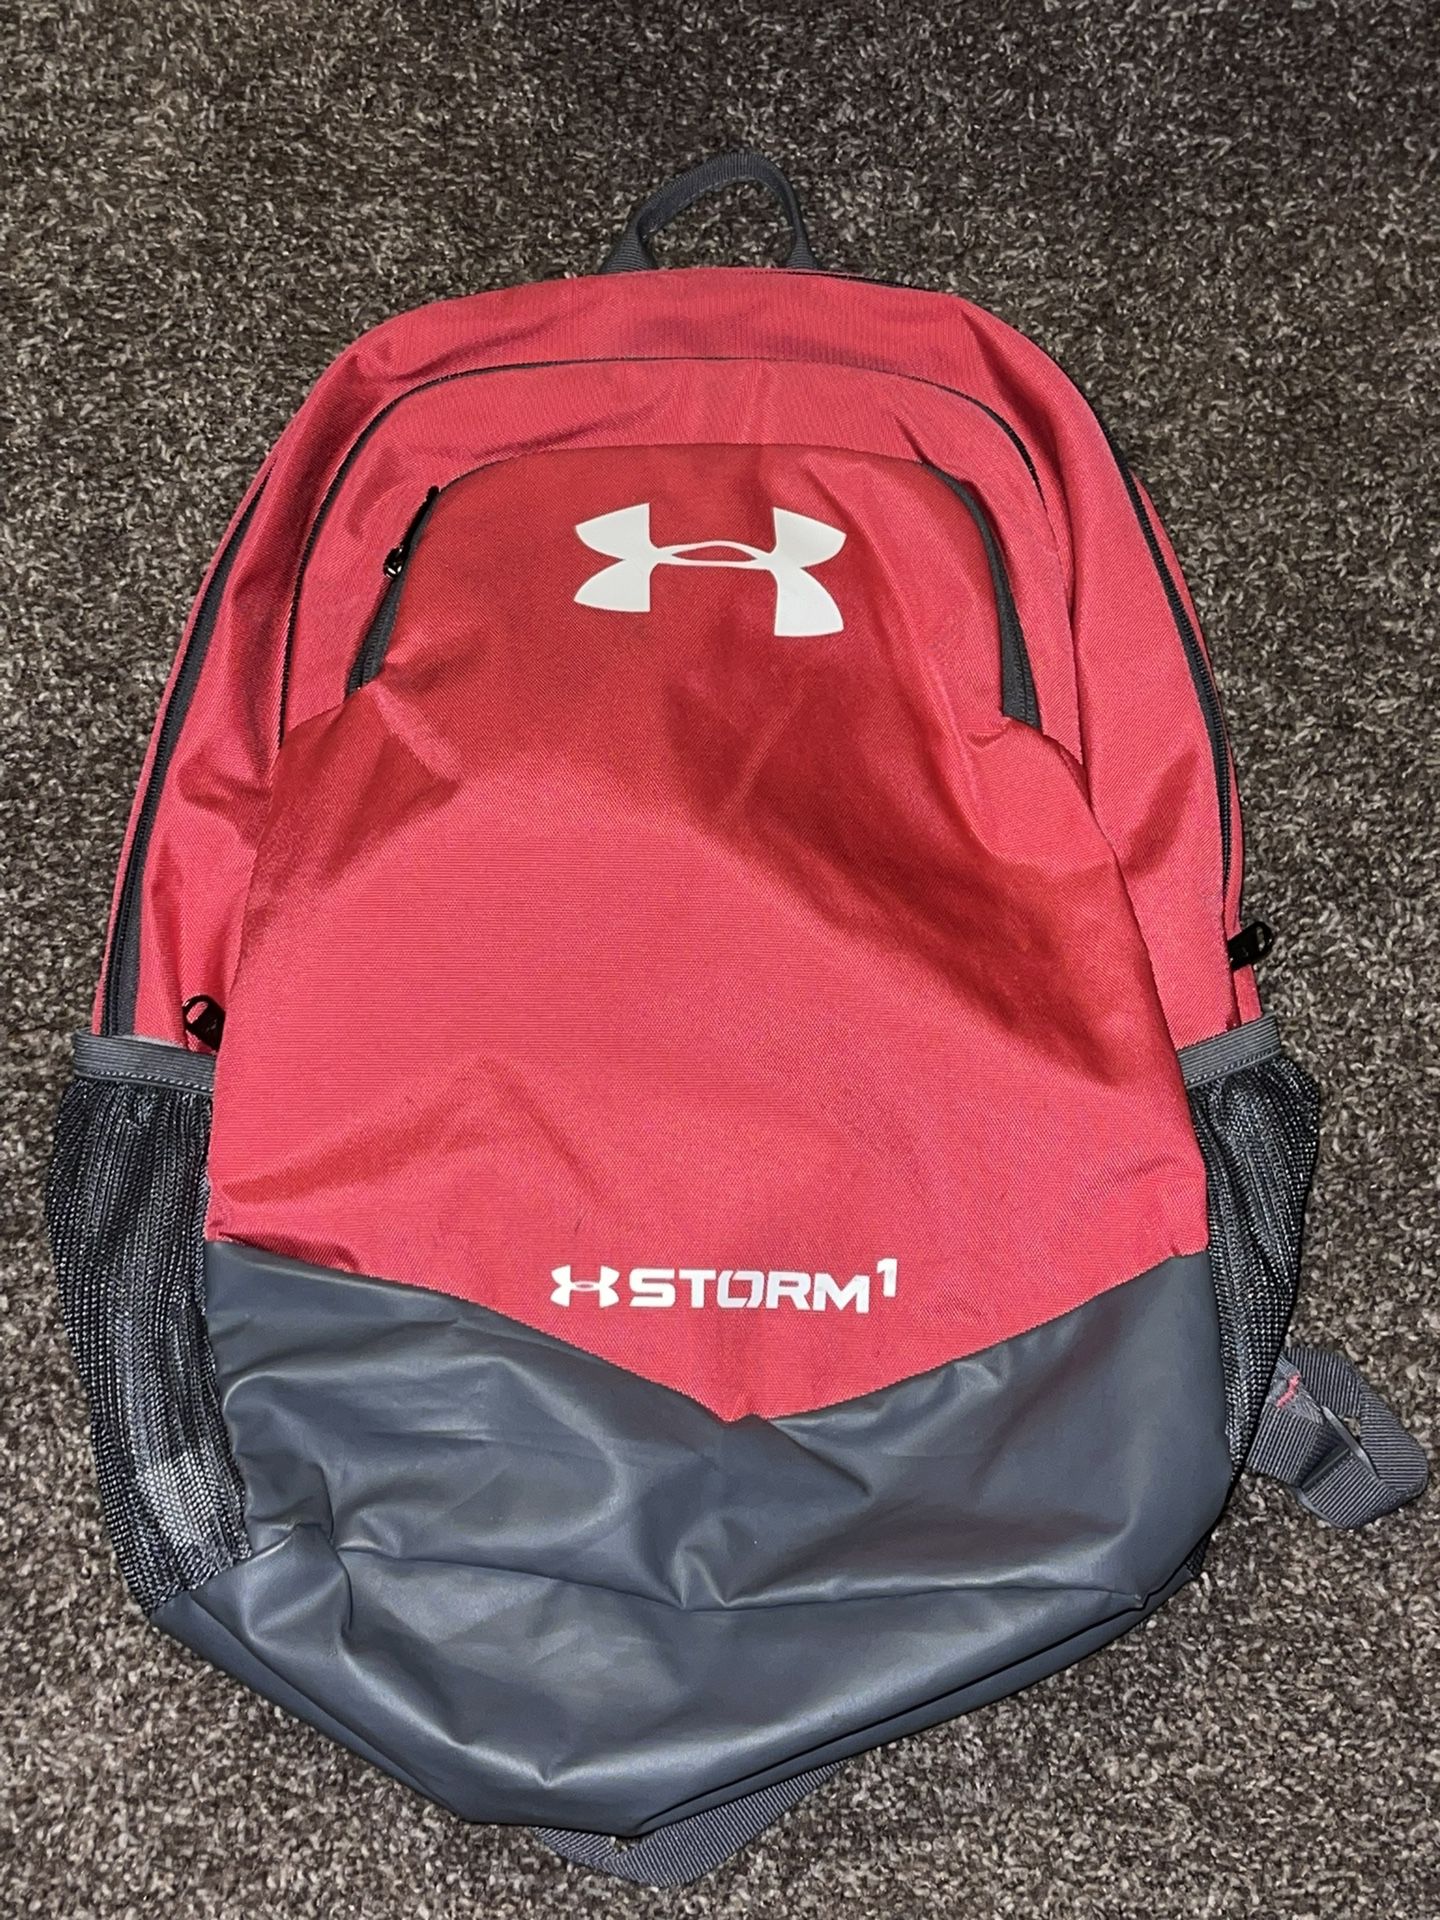 Under Armour Heat Gear X Storm 1 Backpack Bookbag Pink Womens Girls Used Pre Own